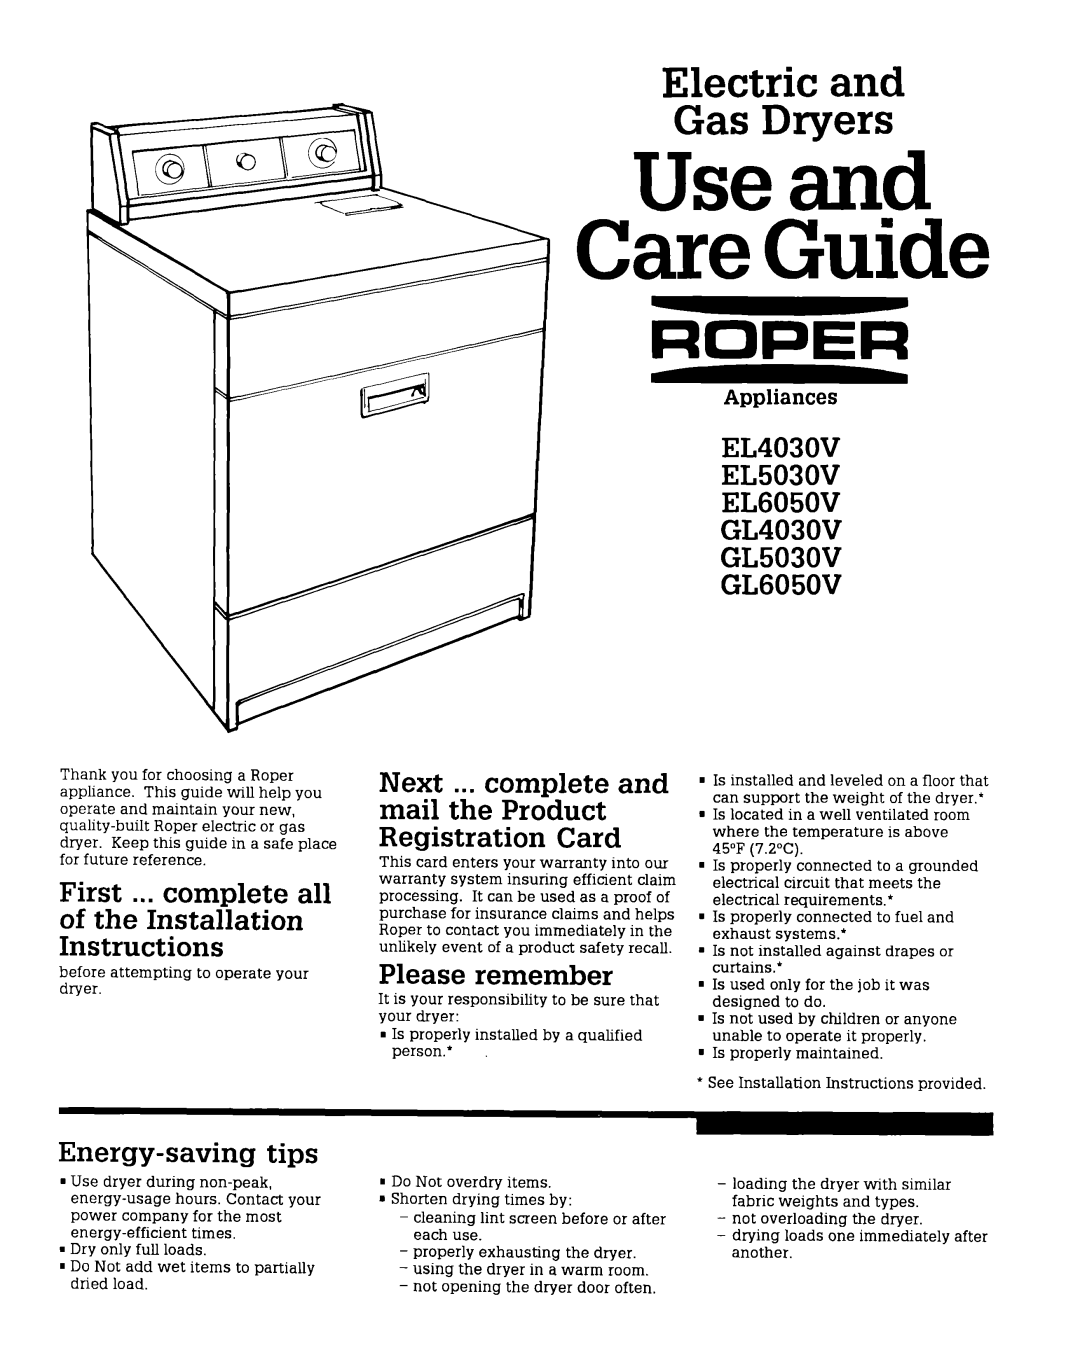 Roper GL5030V installation instructions Electric and Gas Dryers, Please remember, tips, Energy-saving, Appliances, Roper 